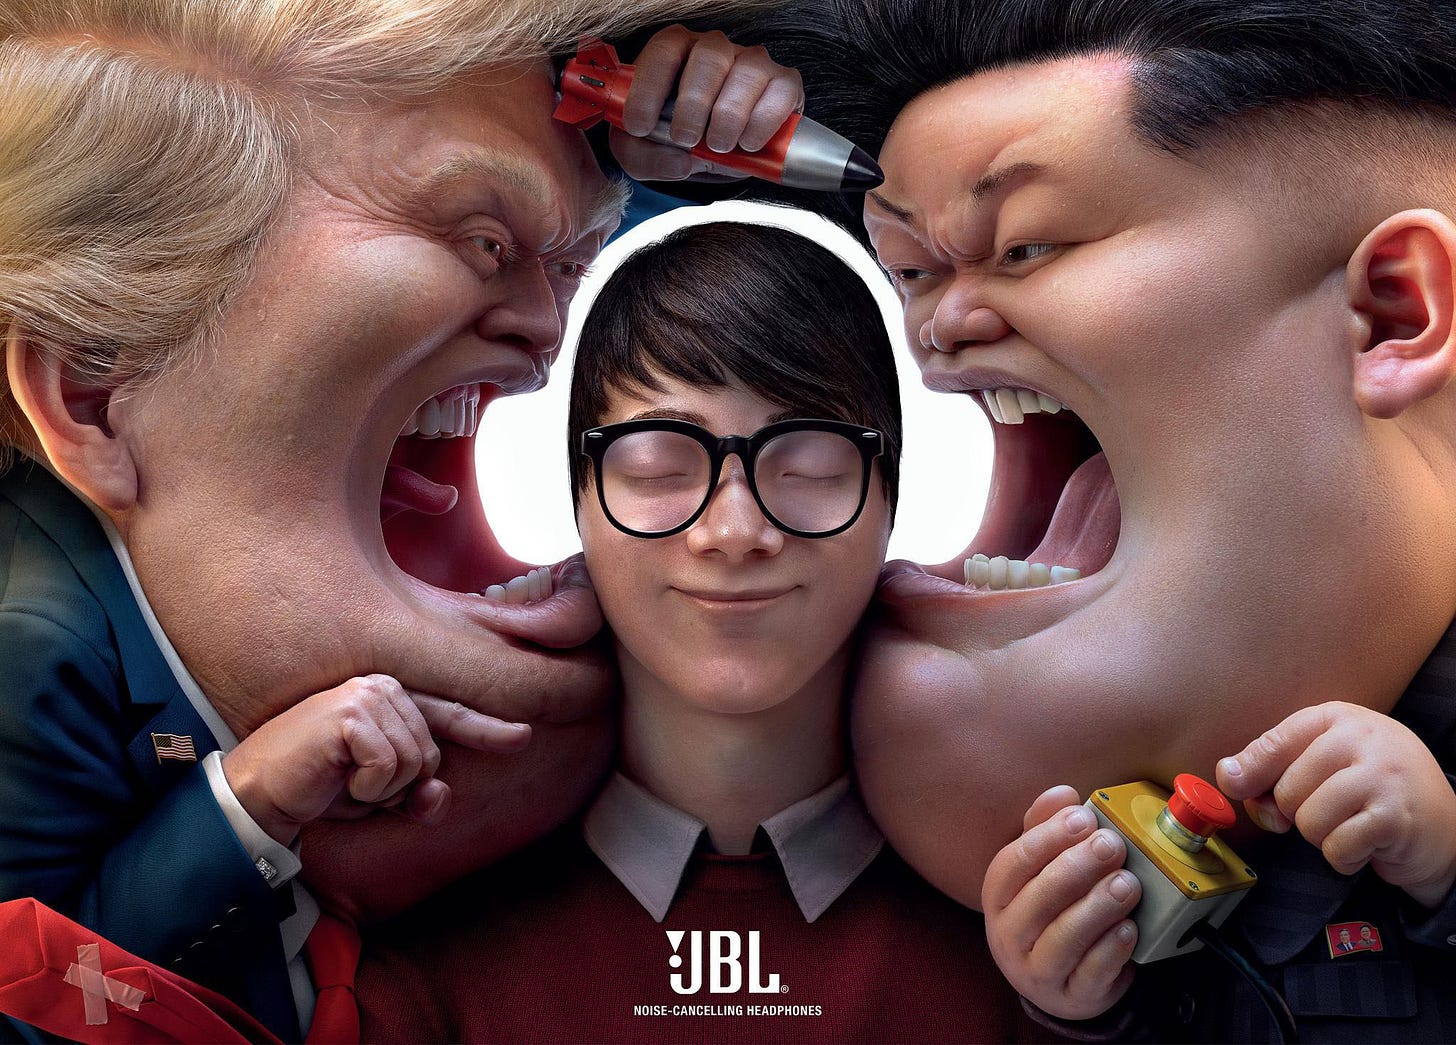 JBL Shows How Effective Their Headphones Are With These Brilliantly  Art-Directed Ads